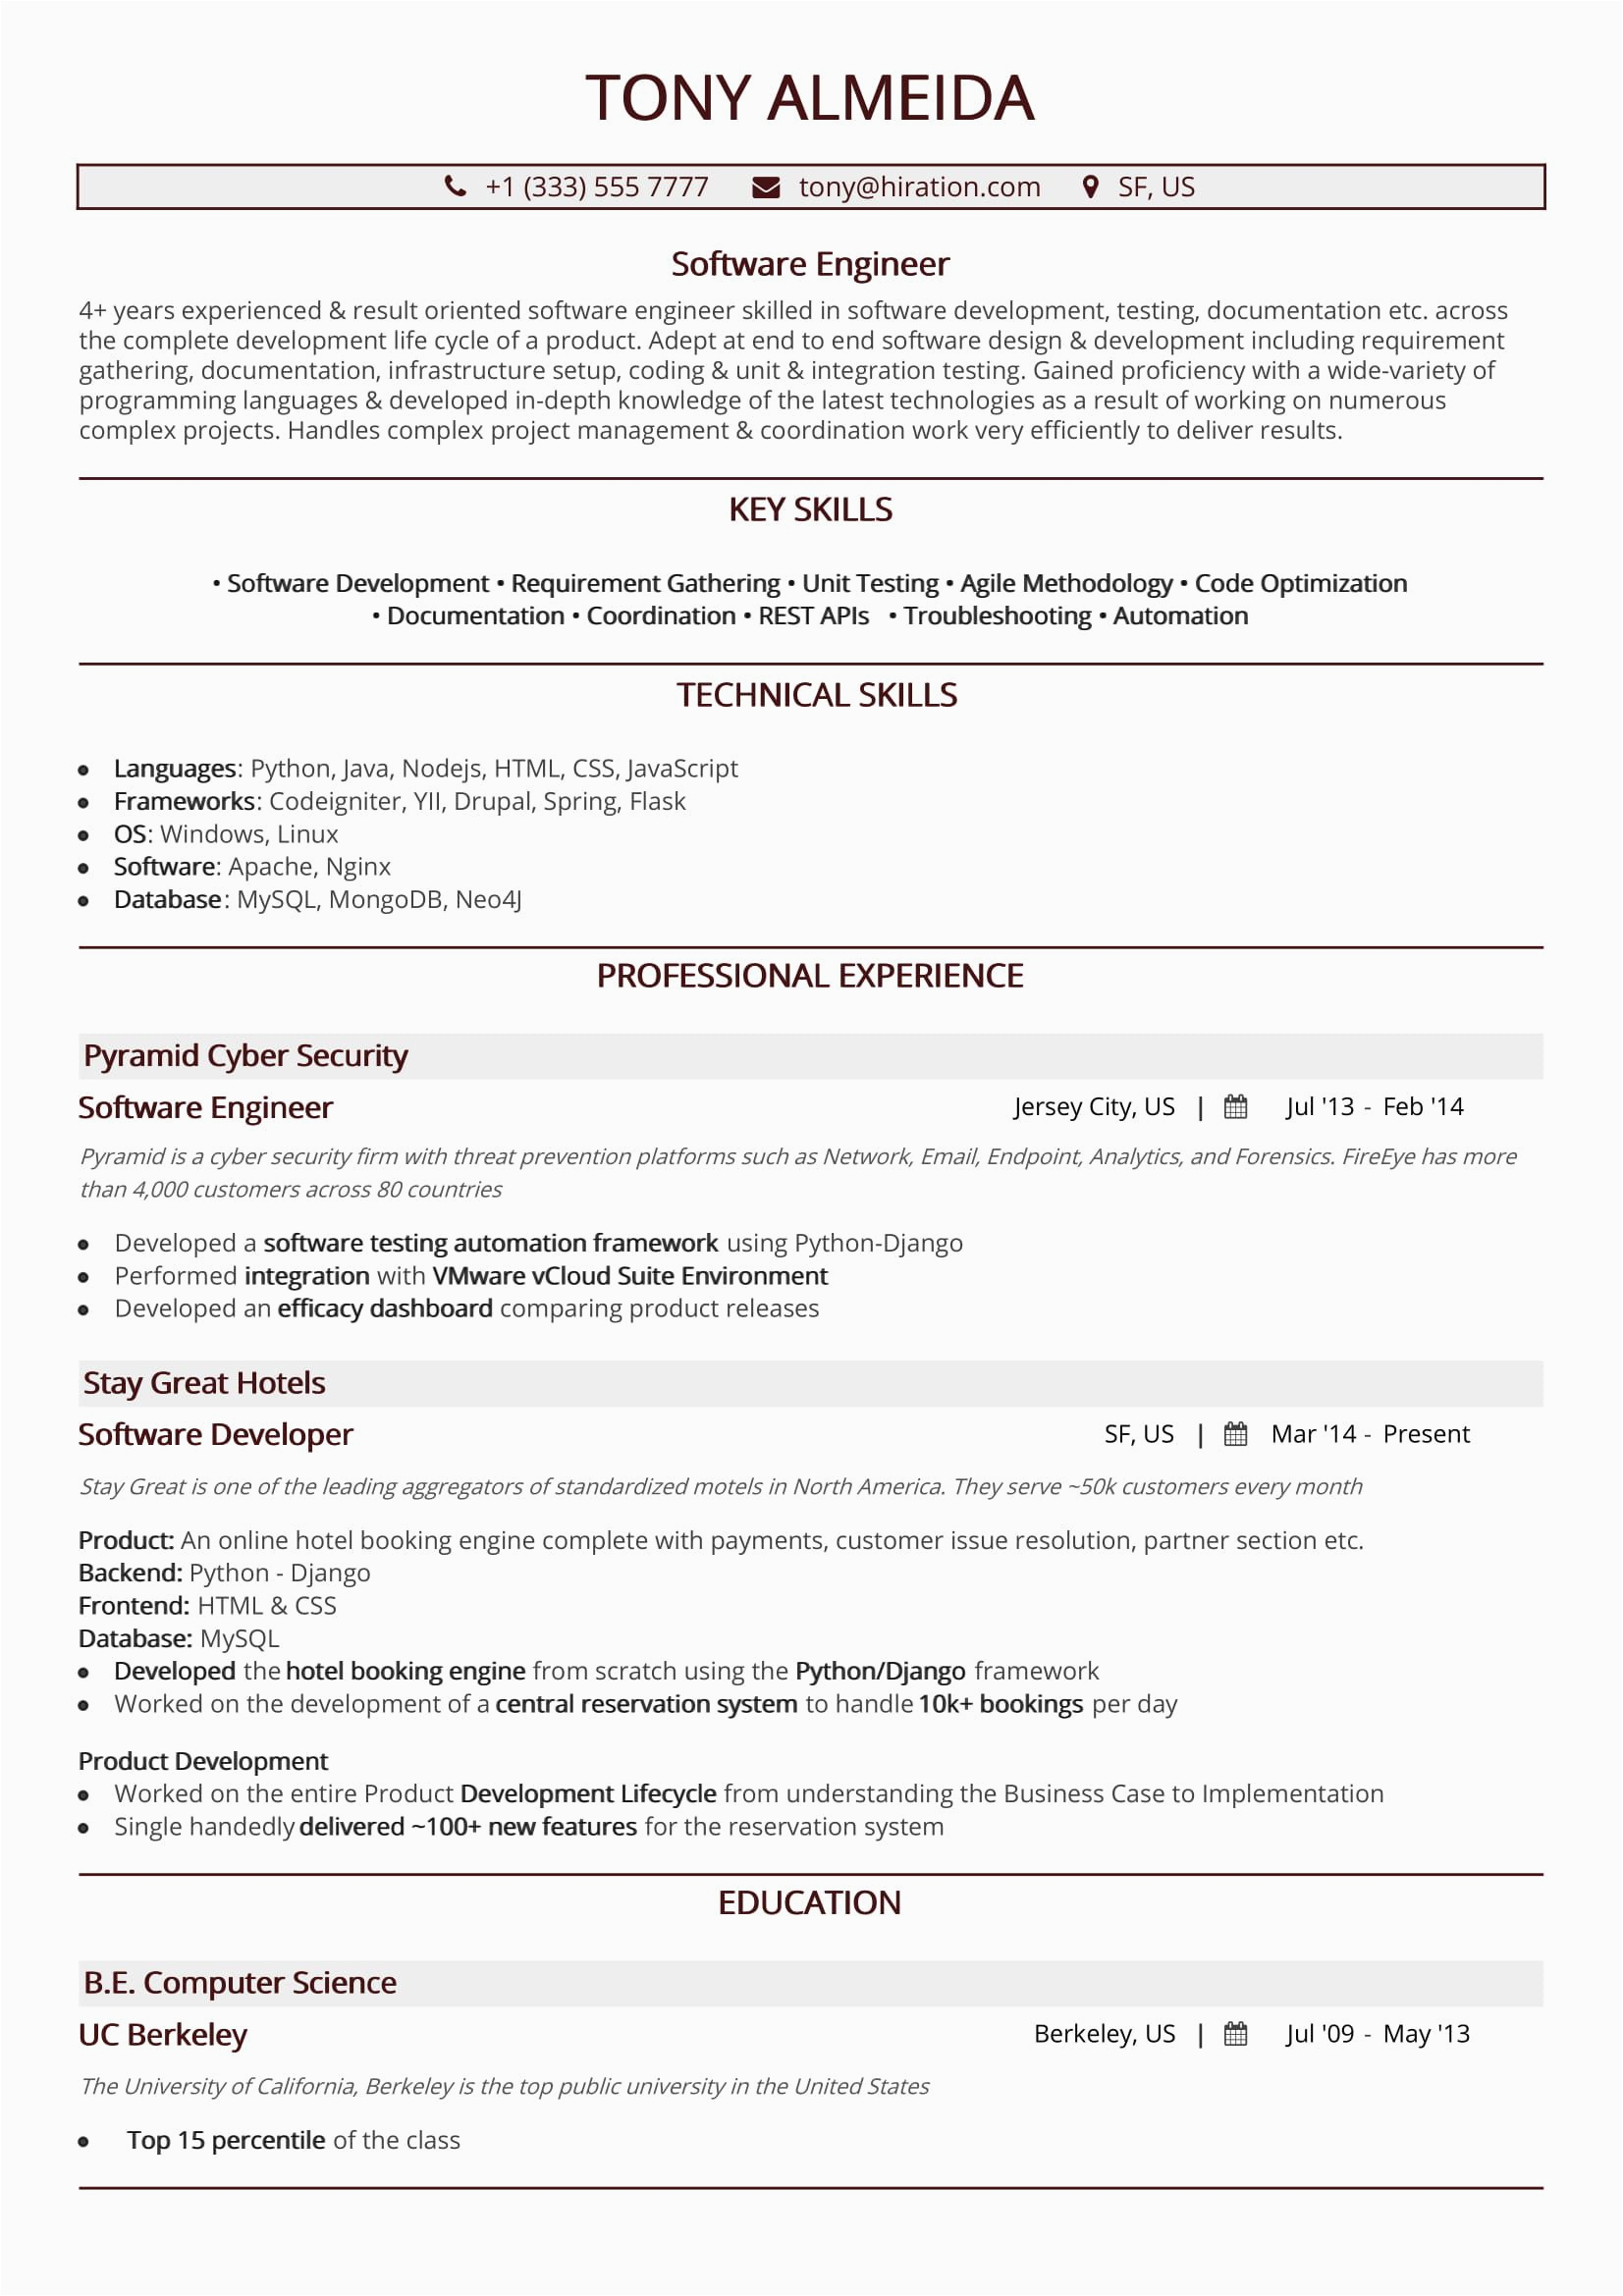 Professional Resume Samples for software Engineers software Engineer Resume A 10 Step 2019 Guide with 20 Samples